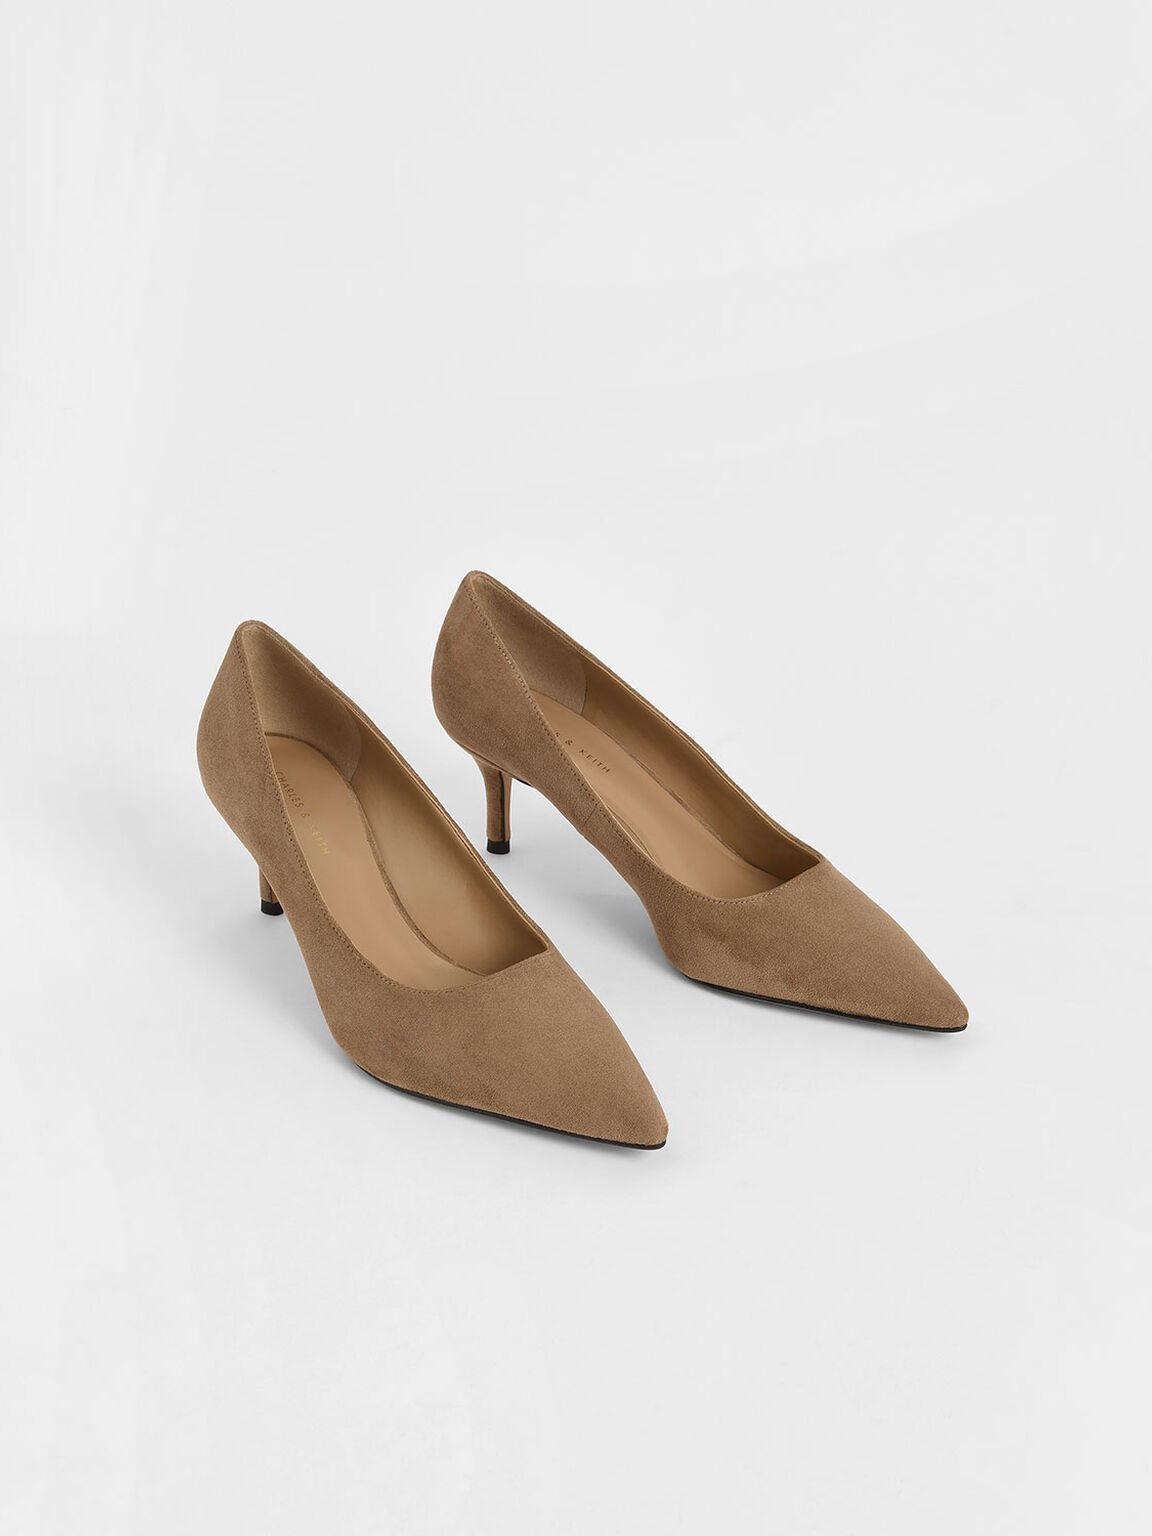 Textured Pointed Toe Court Shoes, Camel, hi-res